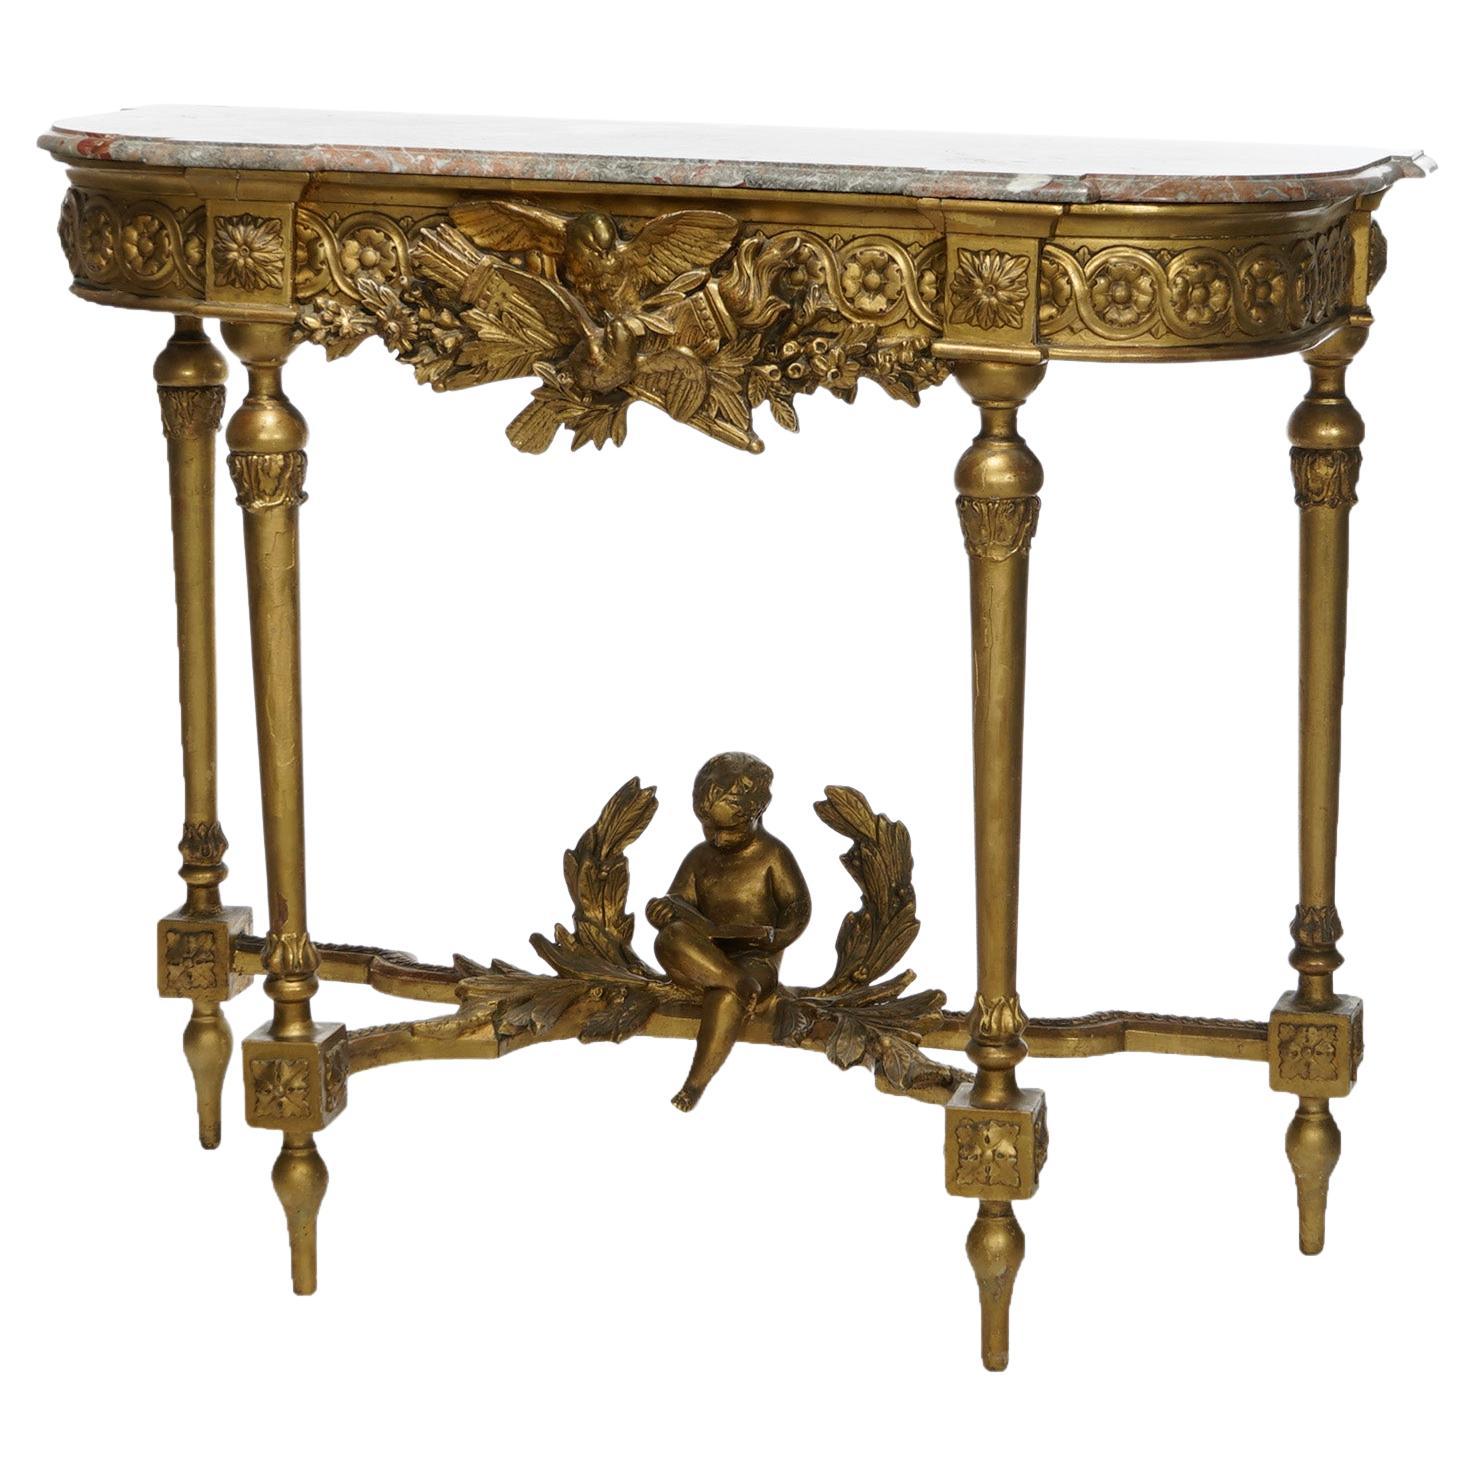 Antique French Louis XIV Figural Cherub Giltwood & Marble Console Table 19thC